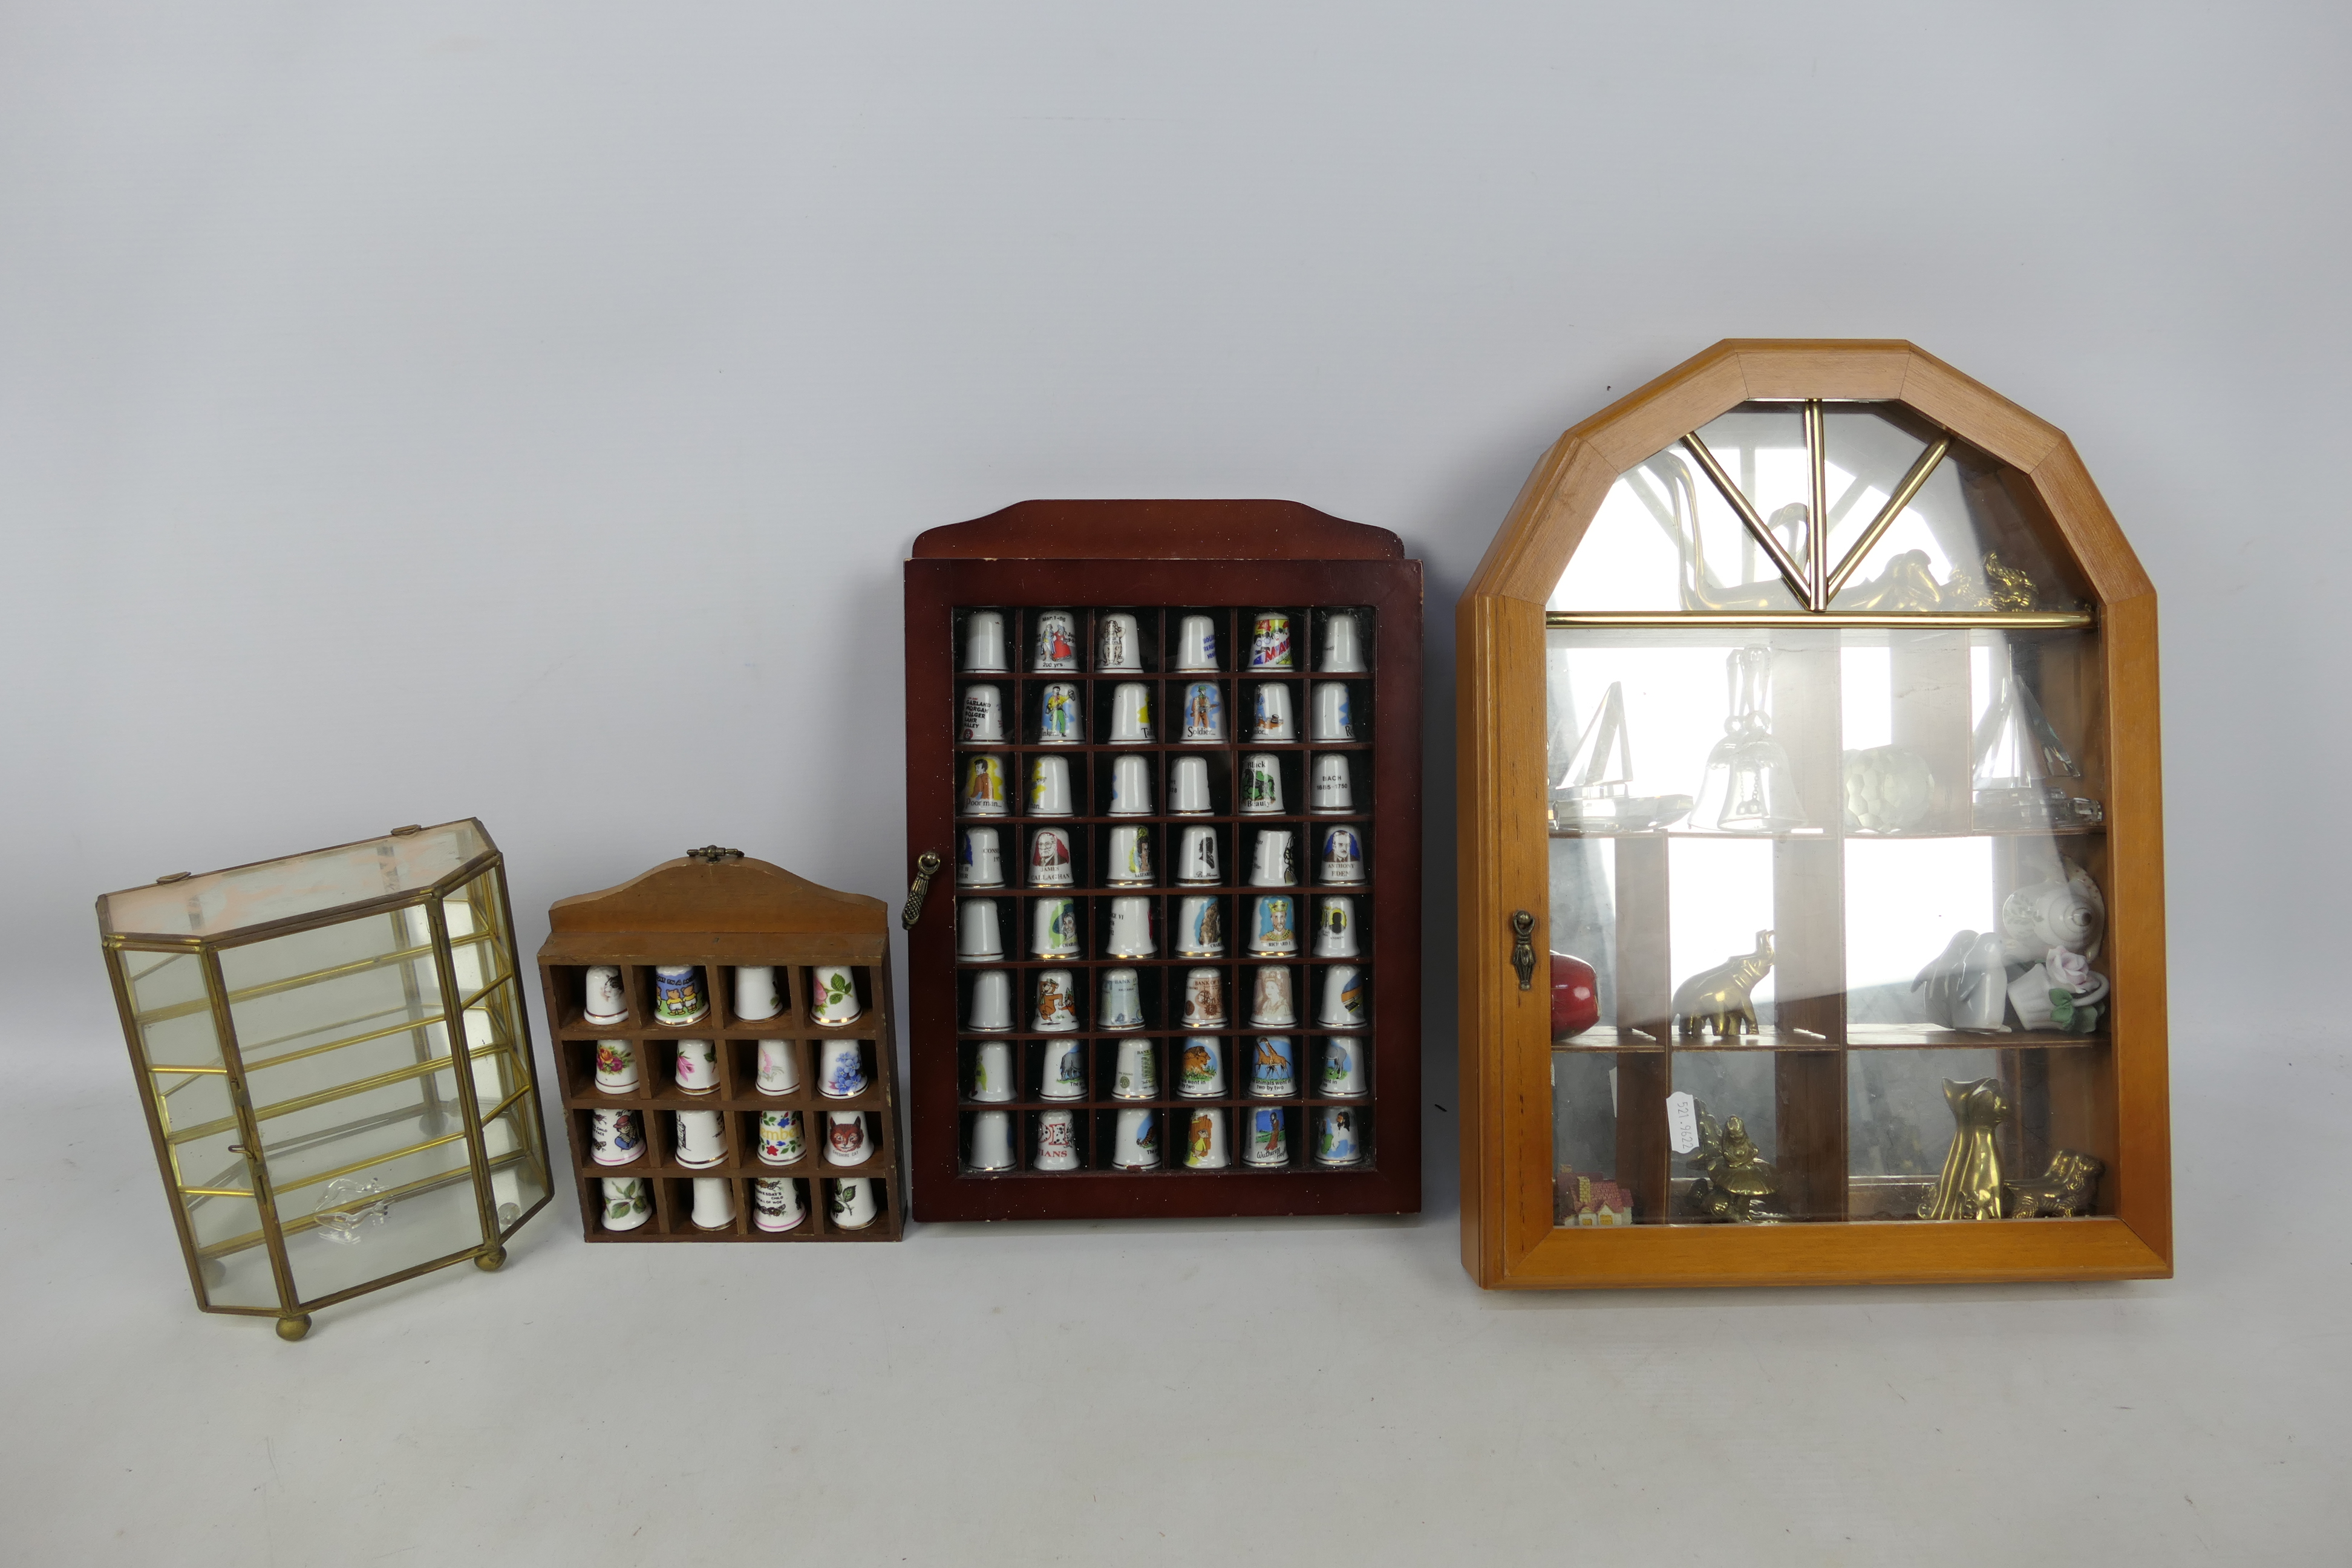 Various display cases containing thimble